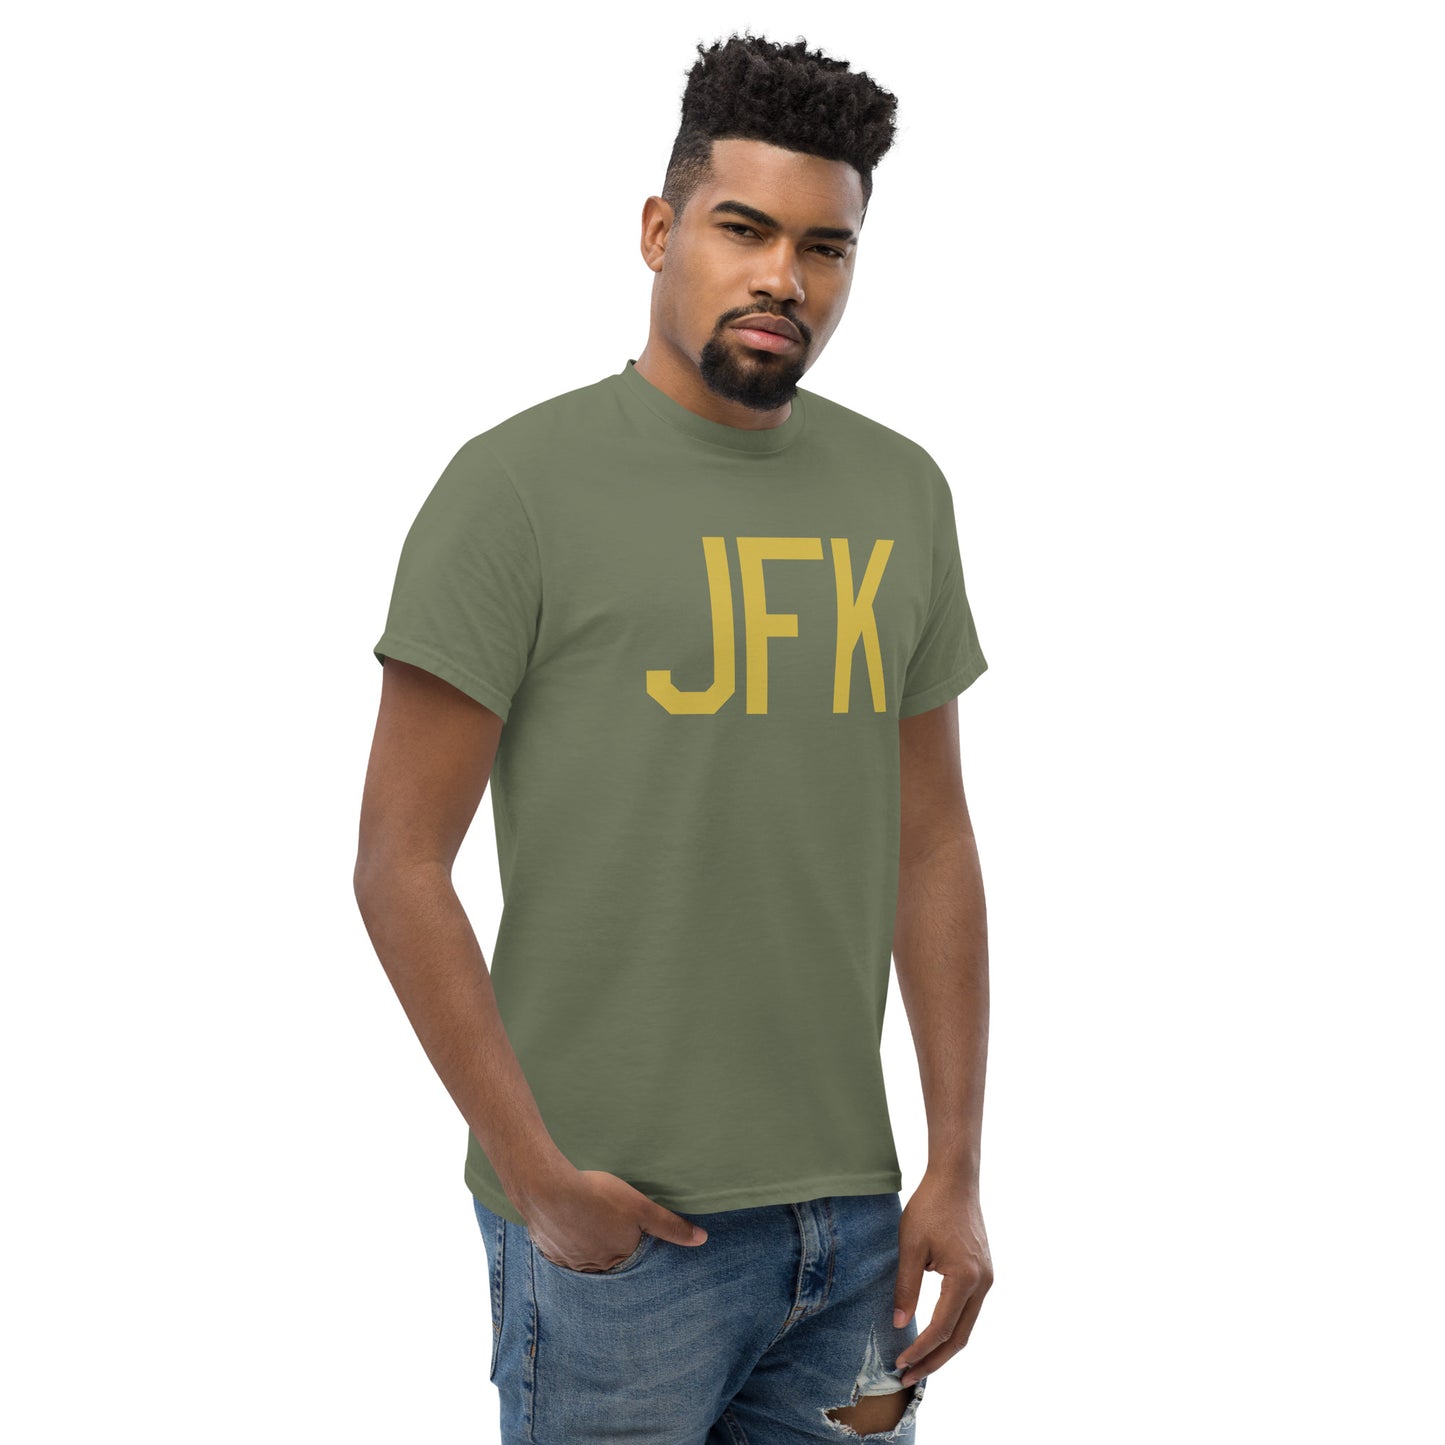 Aviation Enthusiast Men's Tee - Old Gold Graphic • JFK New York City • YHM Designs - Image 08